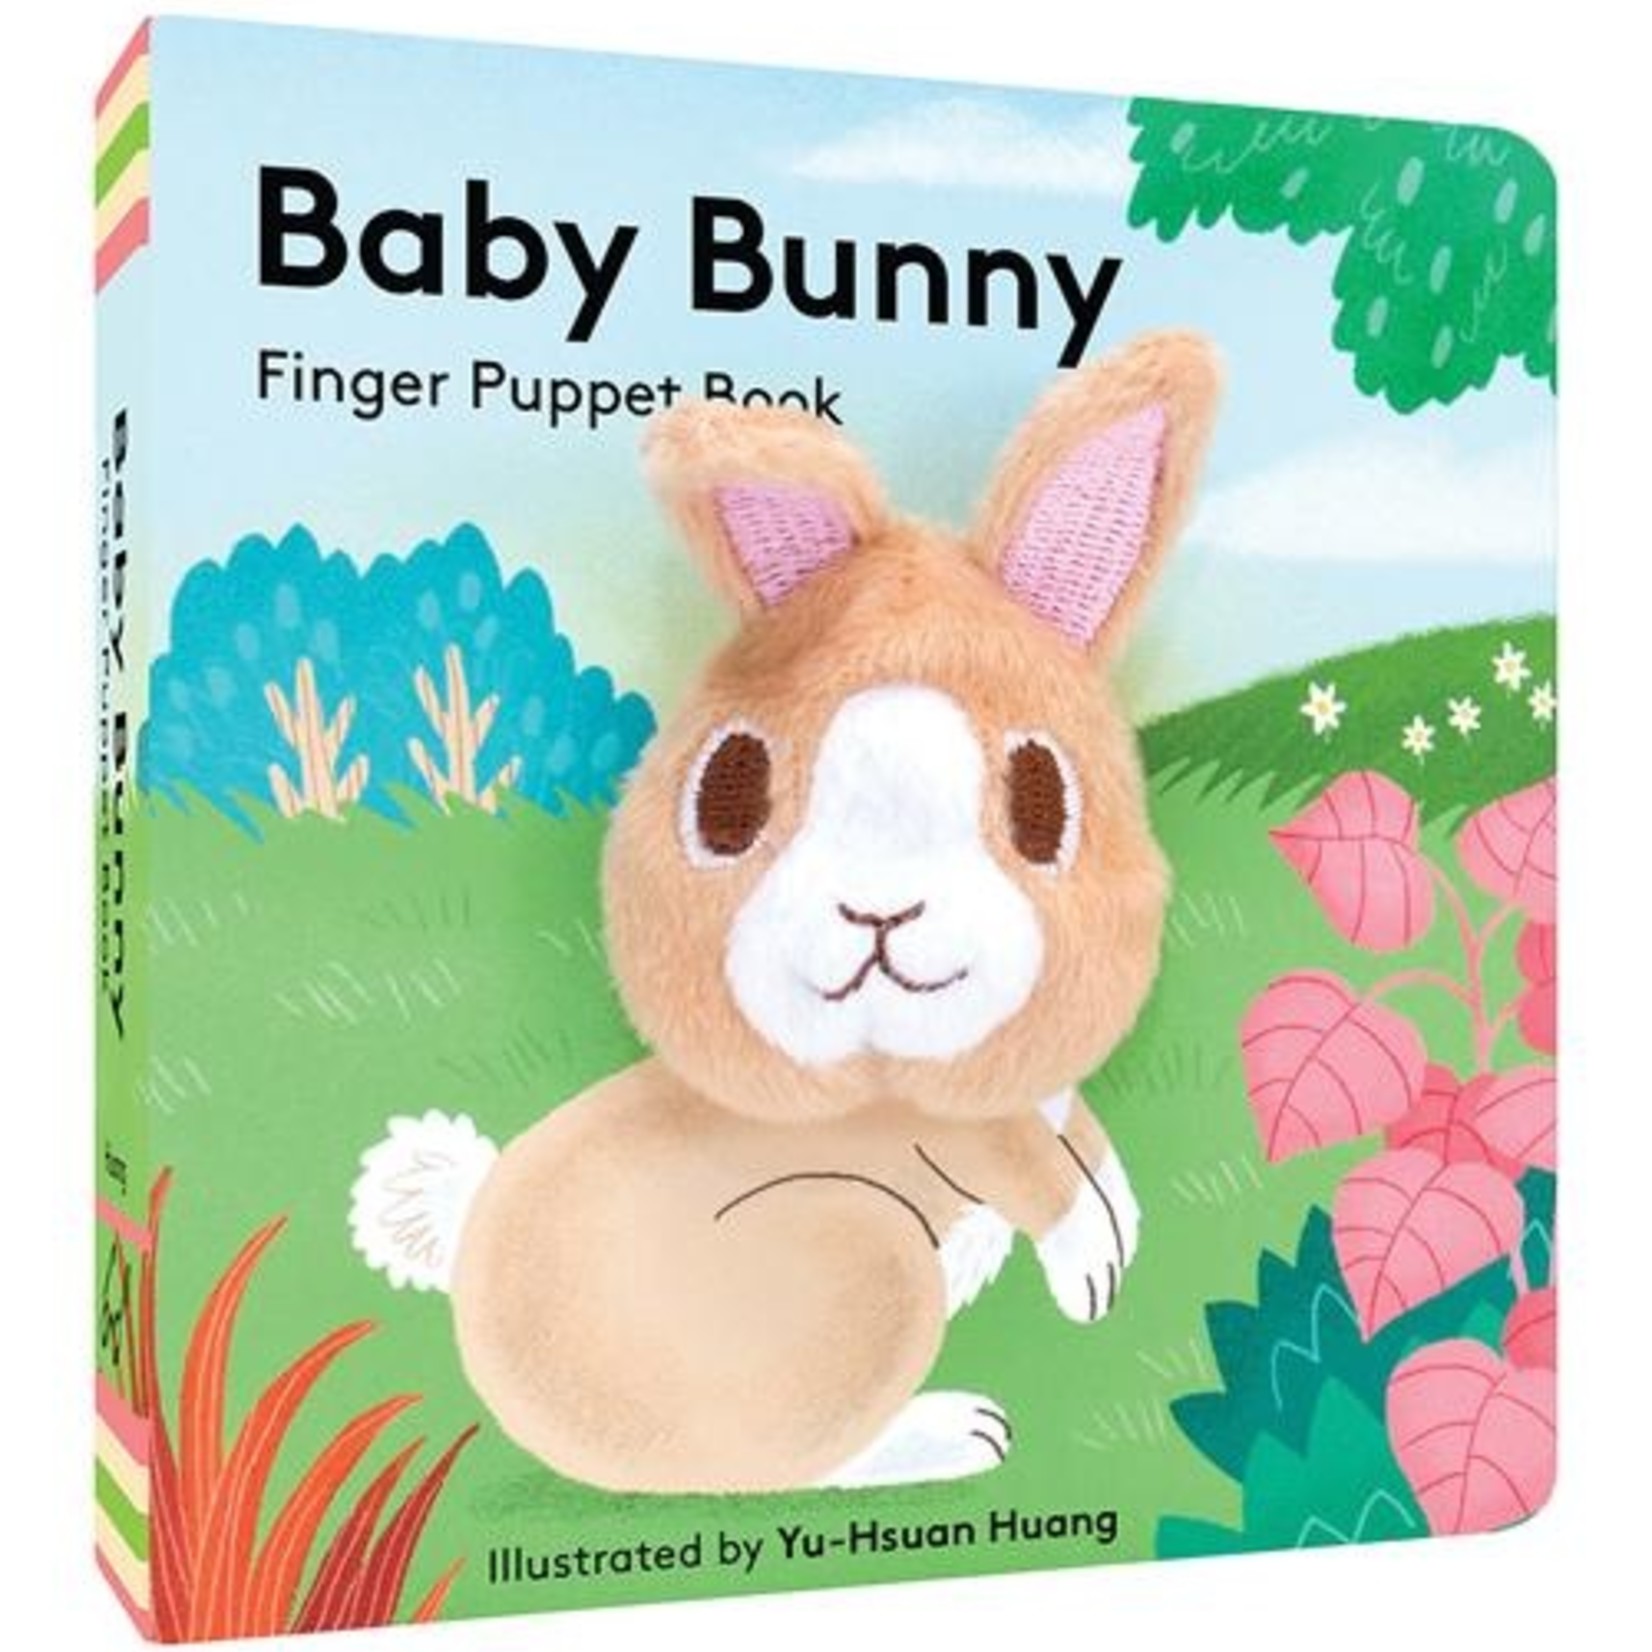 Finger Puppet Book - Baby Bunny